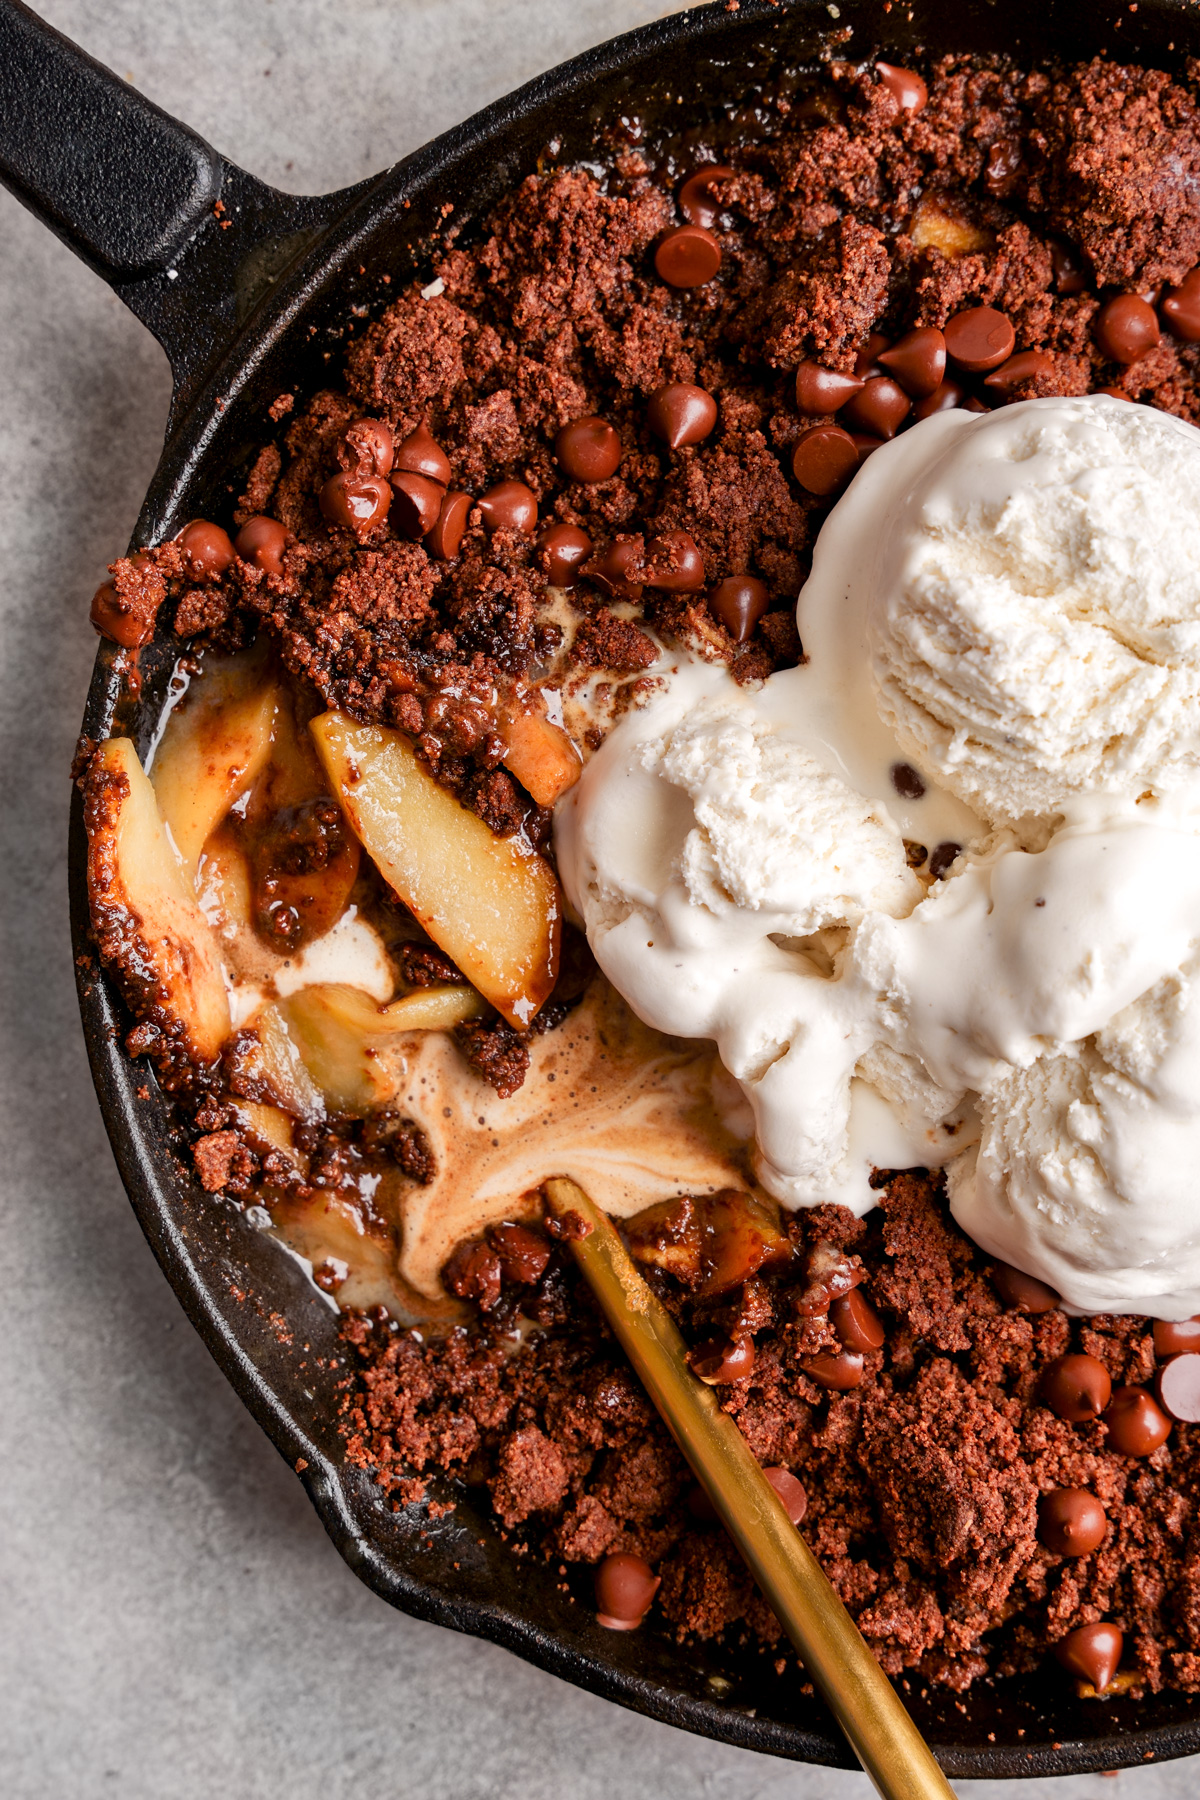 a close up of the chocolate vegan apple crisp with the melted chocolate and ice cream running through it